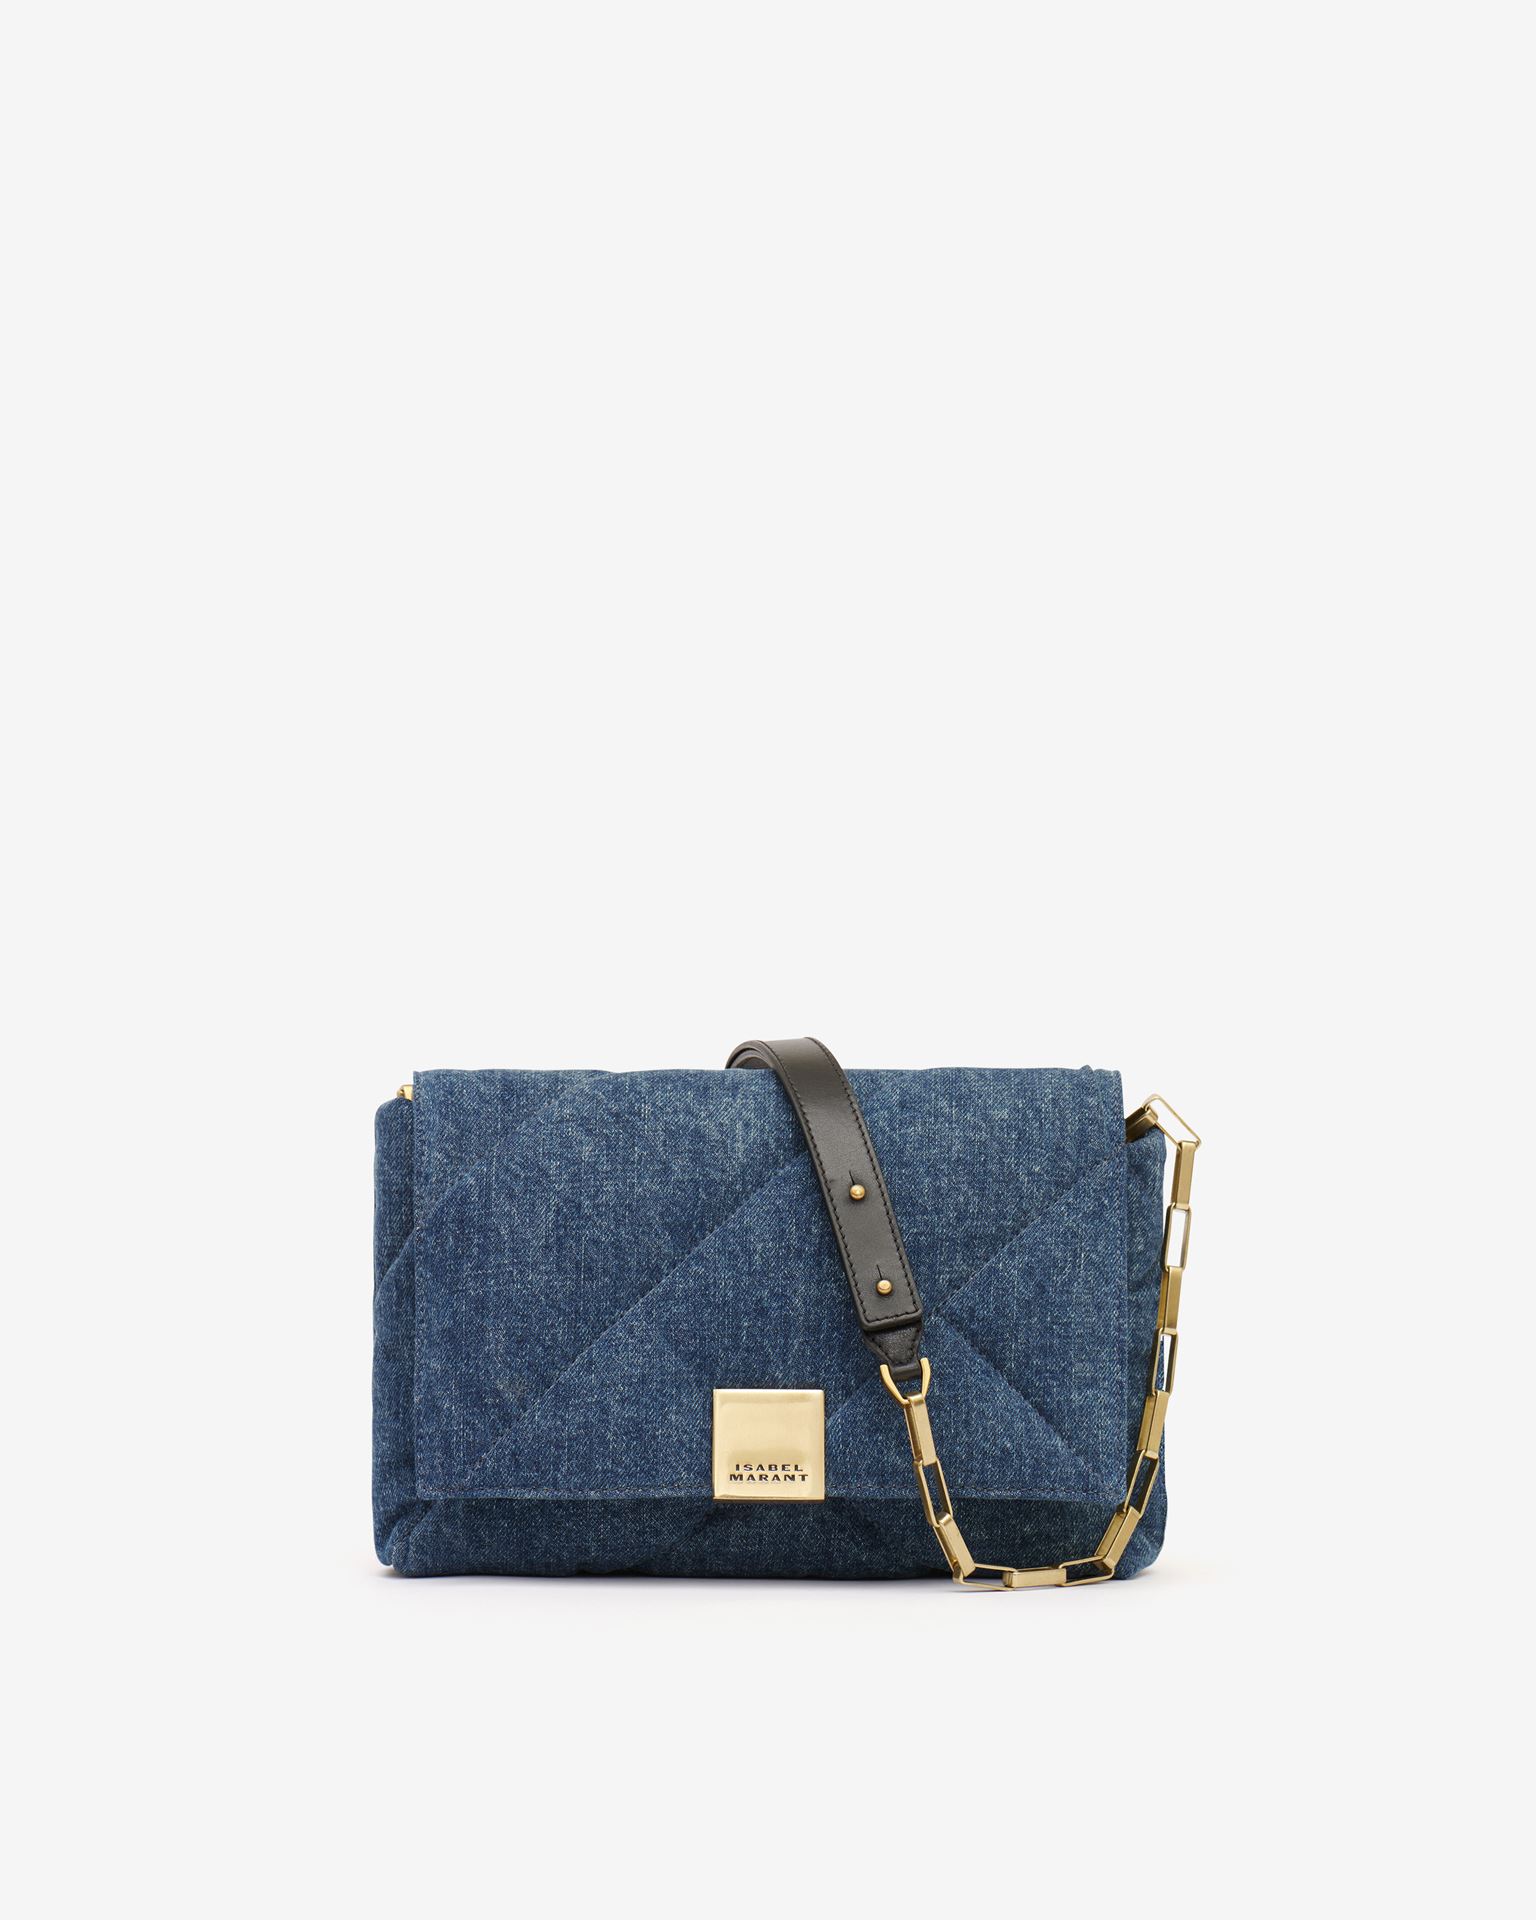 Isabel Marant, Merine Puffy Quilted Leather Bag - Women - Blue